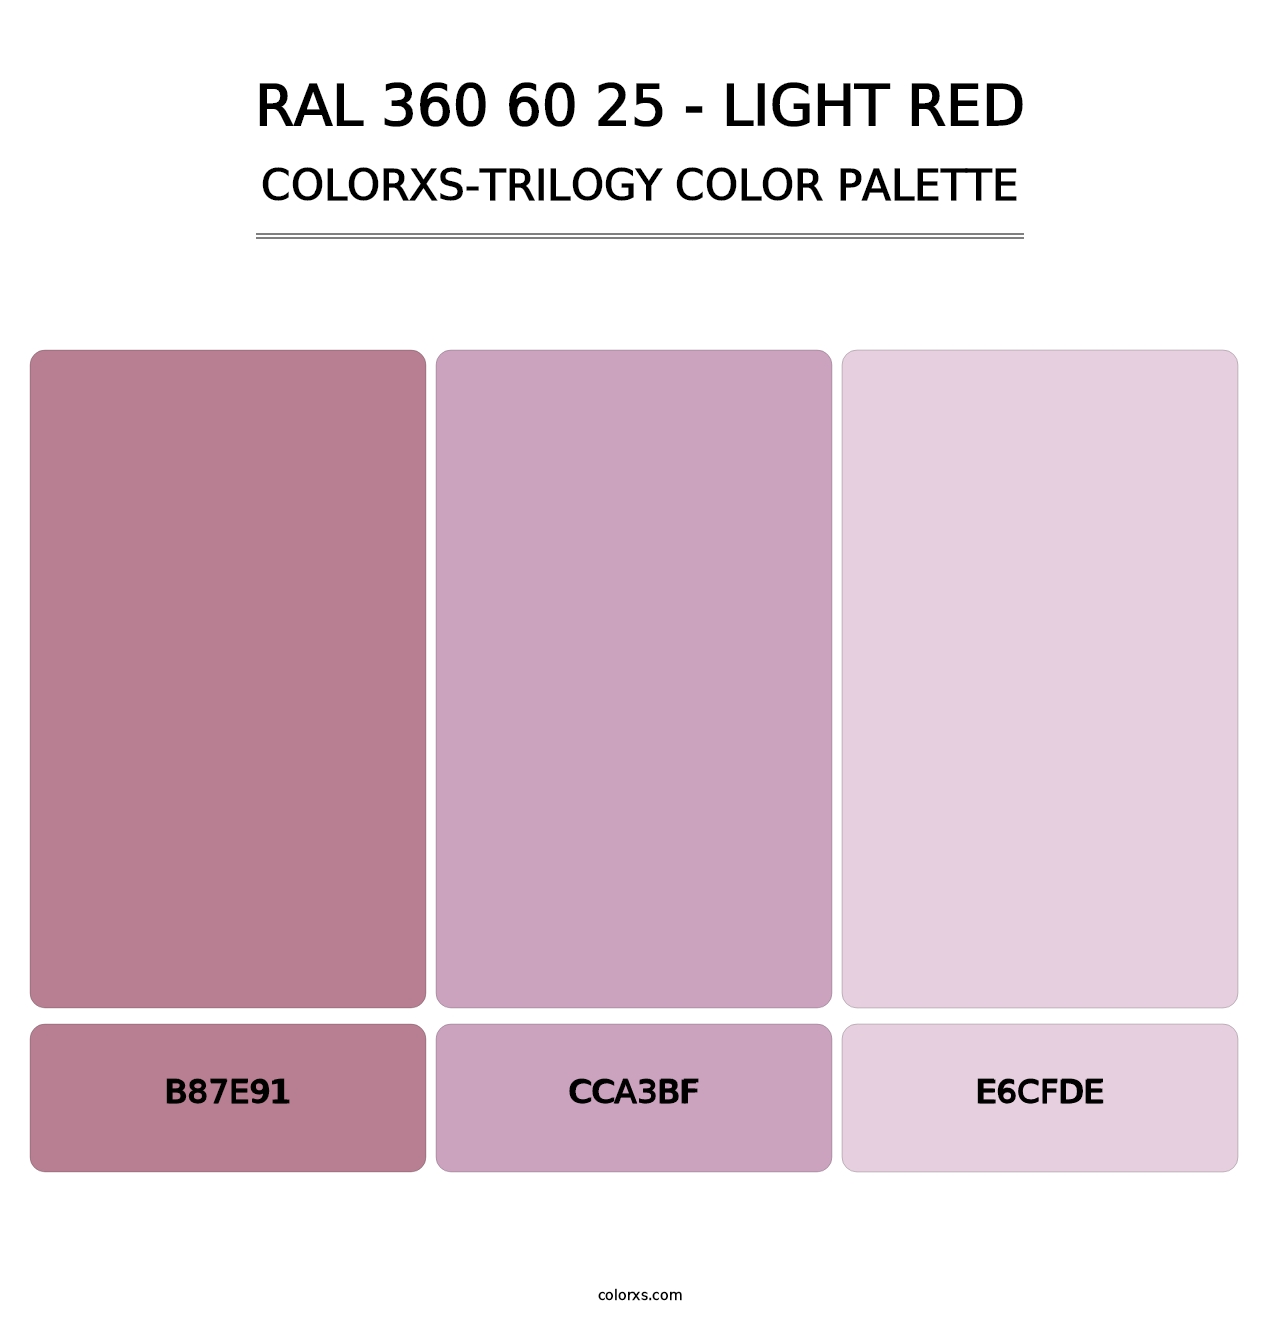 RAL 360 60 25 - Light Red - Colorxs Trilogy Palette